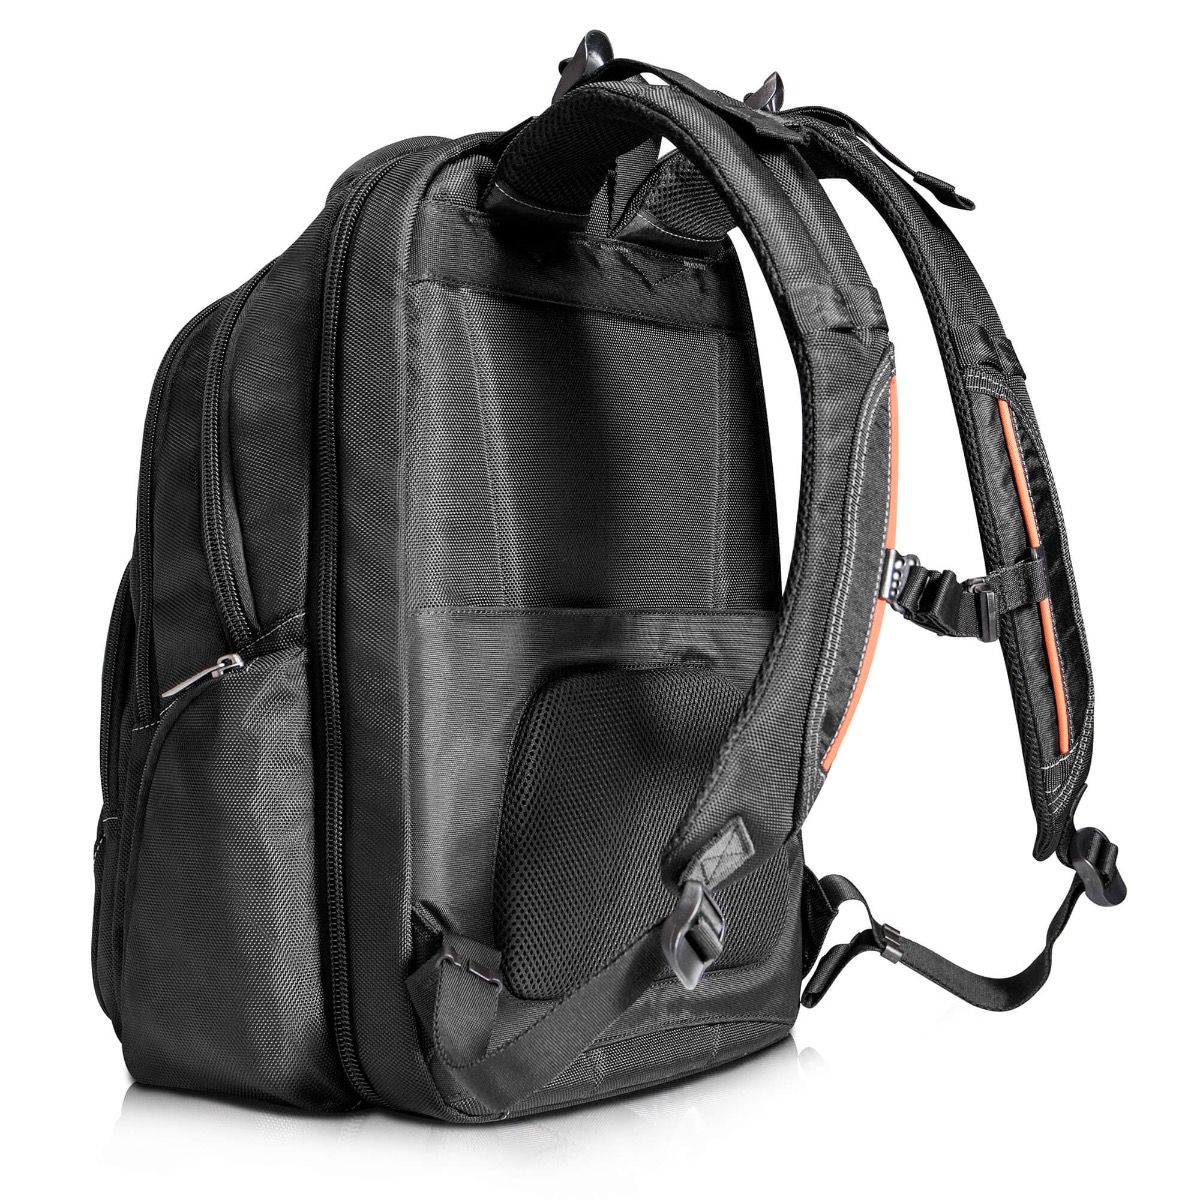 Atlas Laptop Backpack 11-15.6-Inch Adaptable Compartment | EVERKI